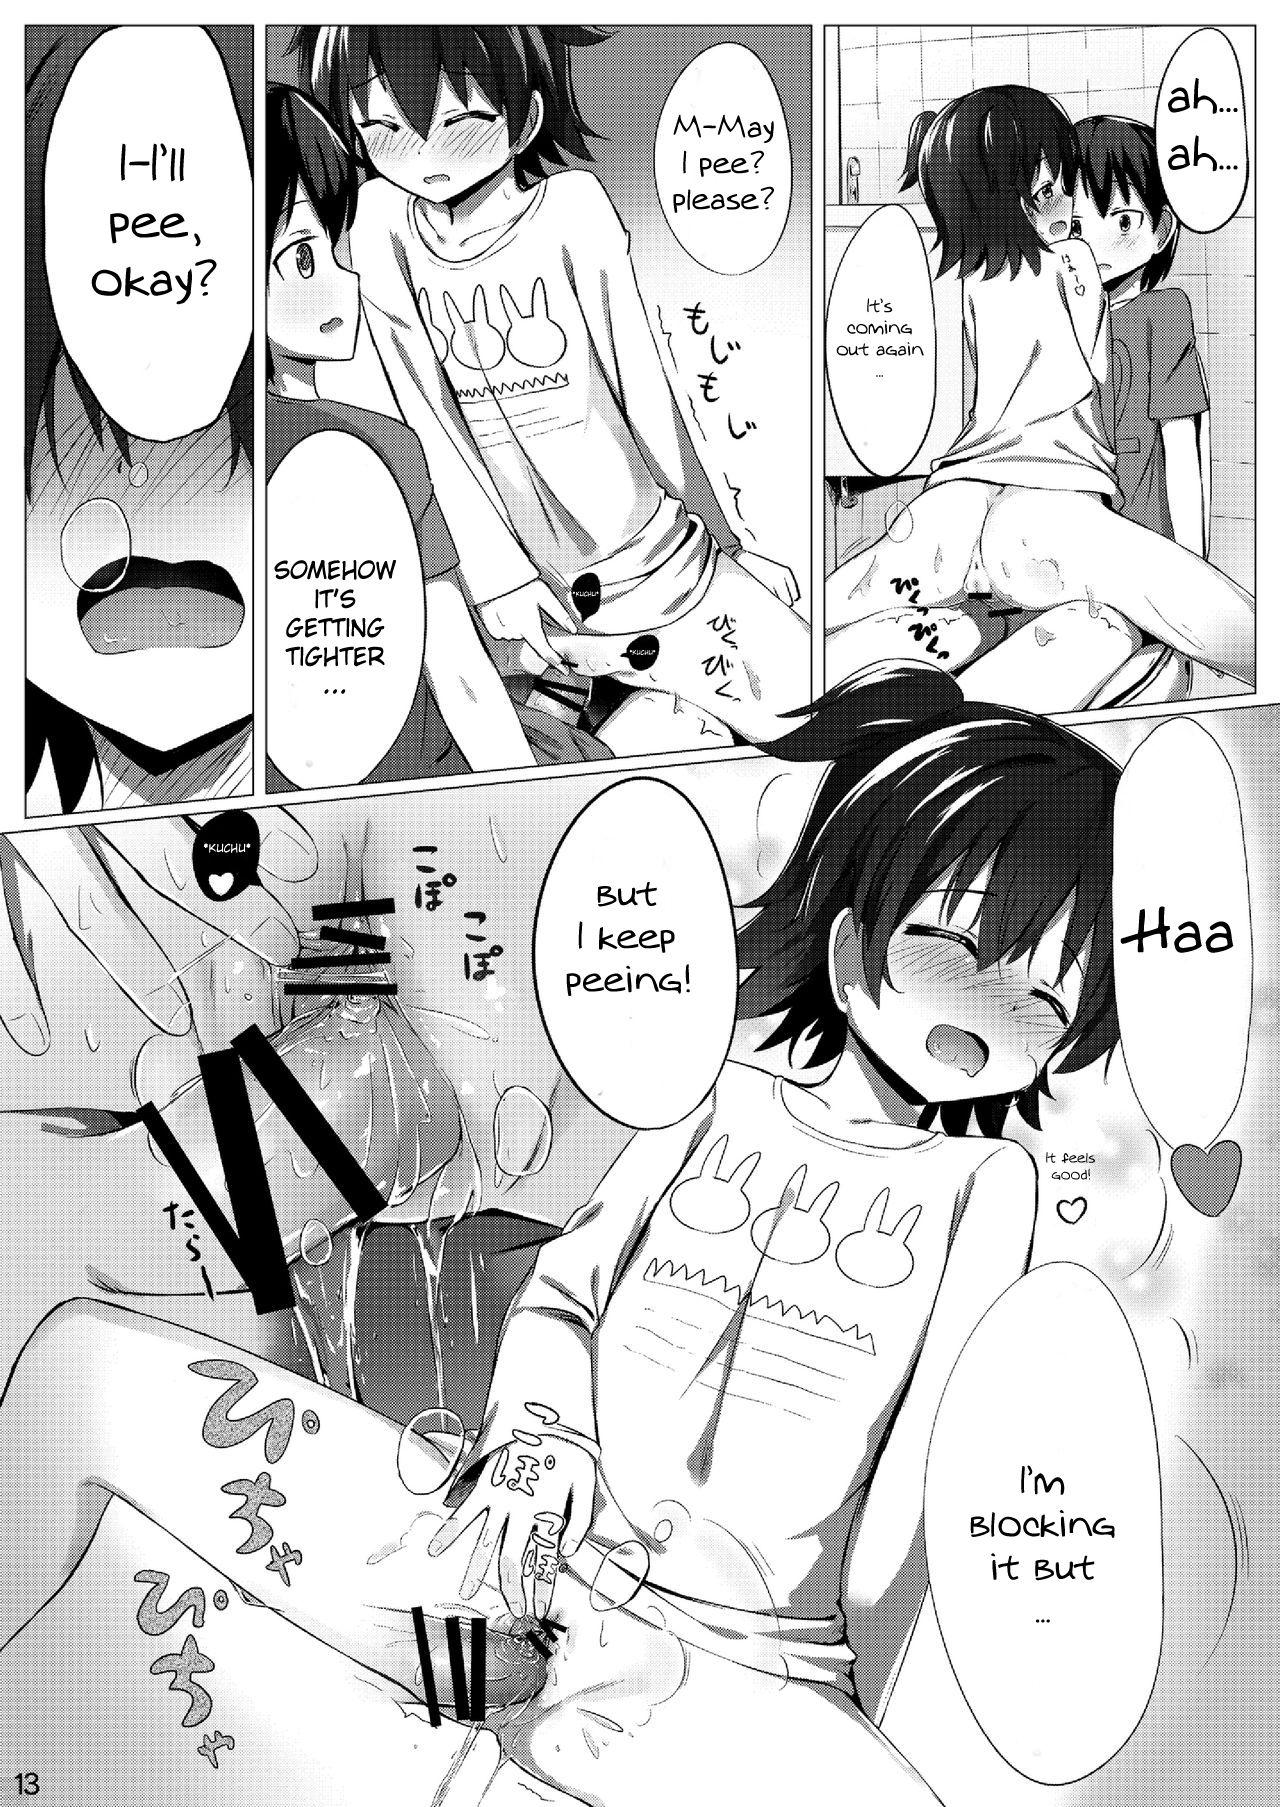 Best Blowjob Ever Miria Mada ○gakusei dayo? | Miria is still ○th schooler you know? - The idolmaster Uncensored - Page 12